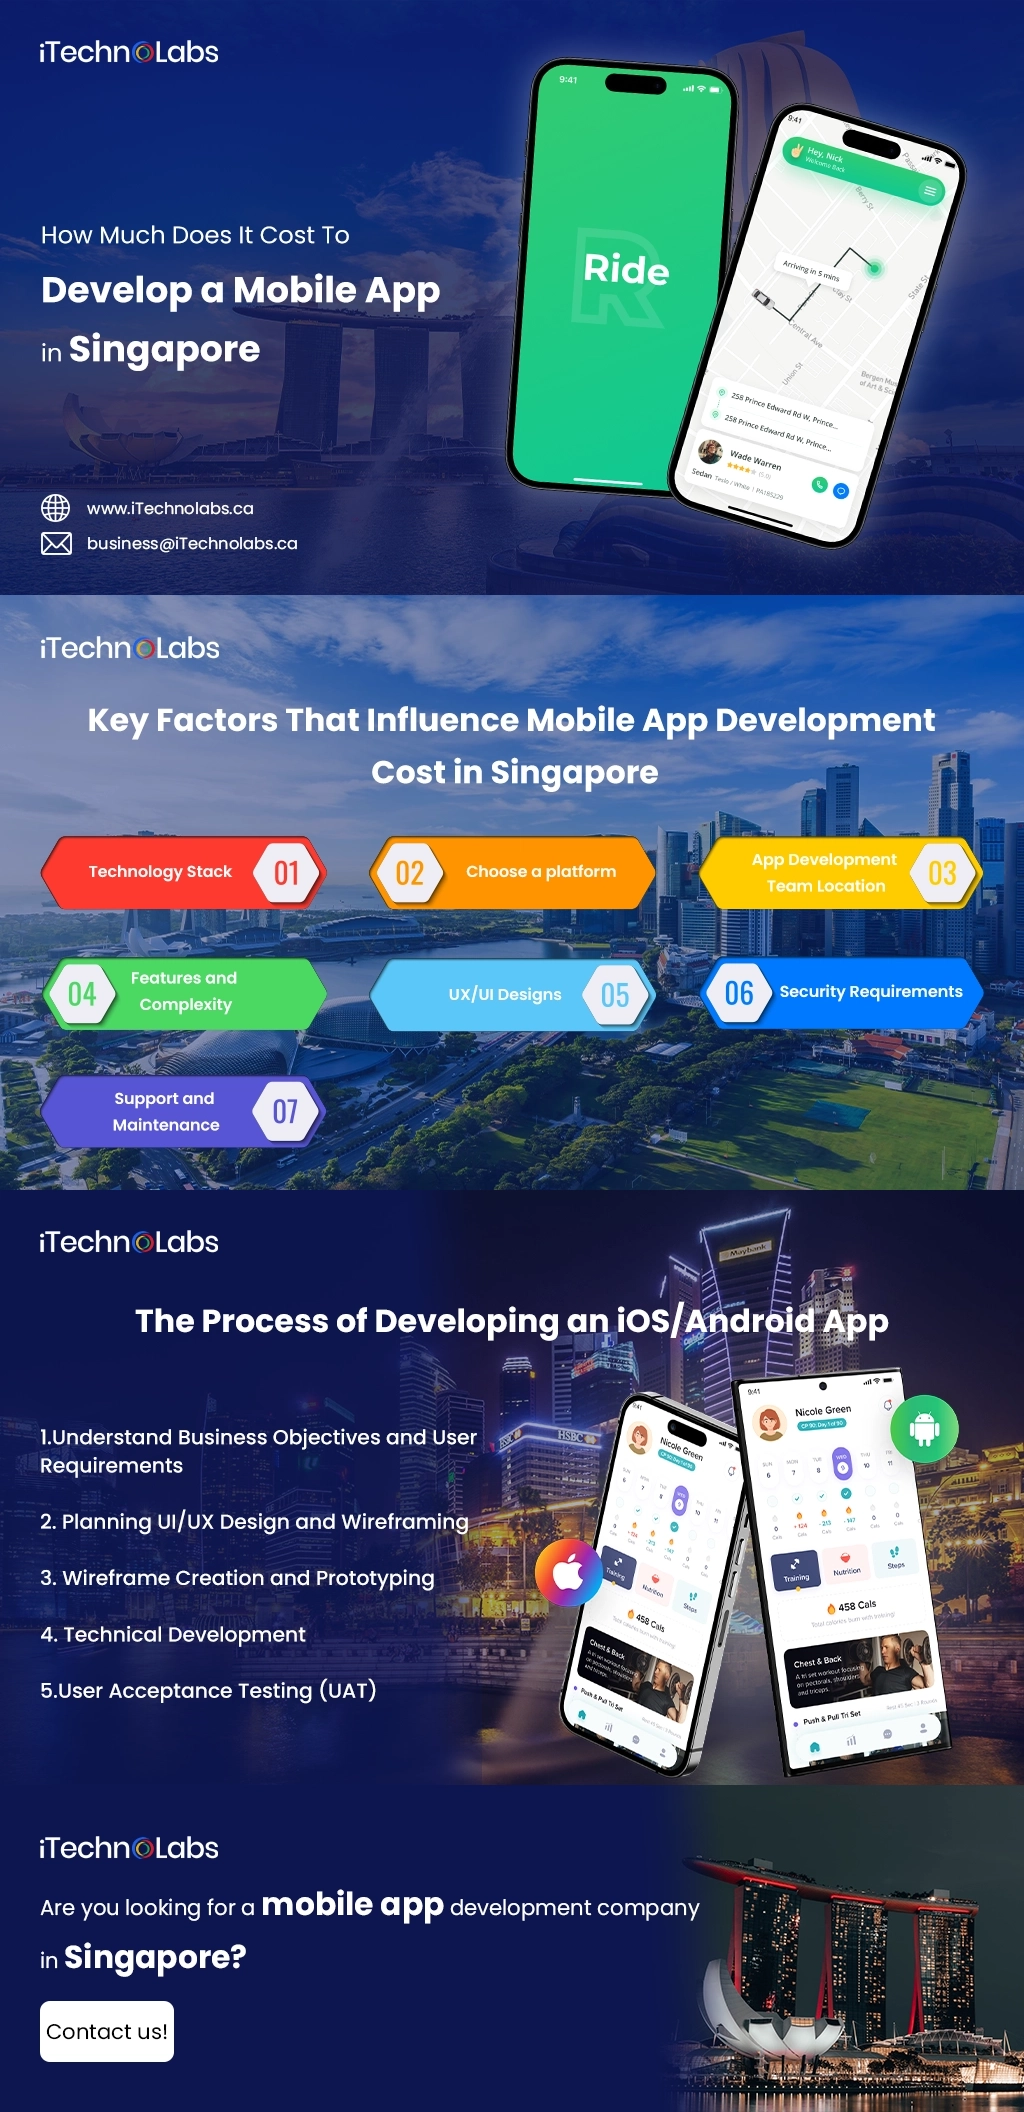 itechnolabs-How Much Does It Cost To Develop a Mobile App in Singapore (all images)